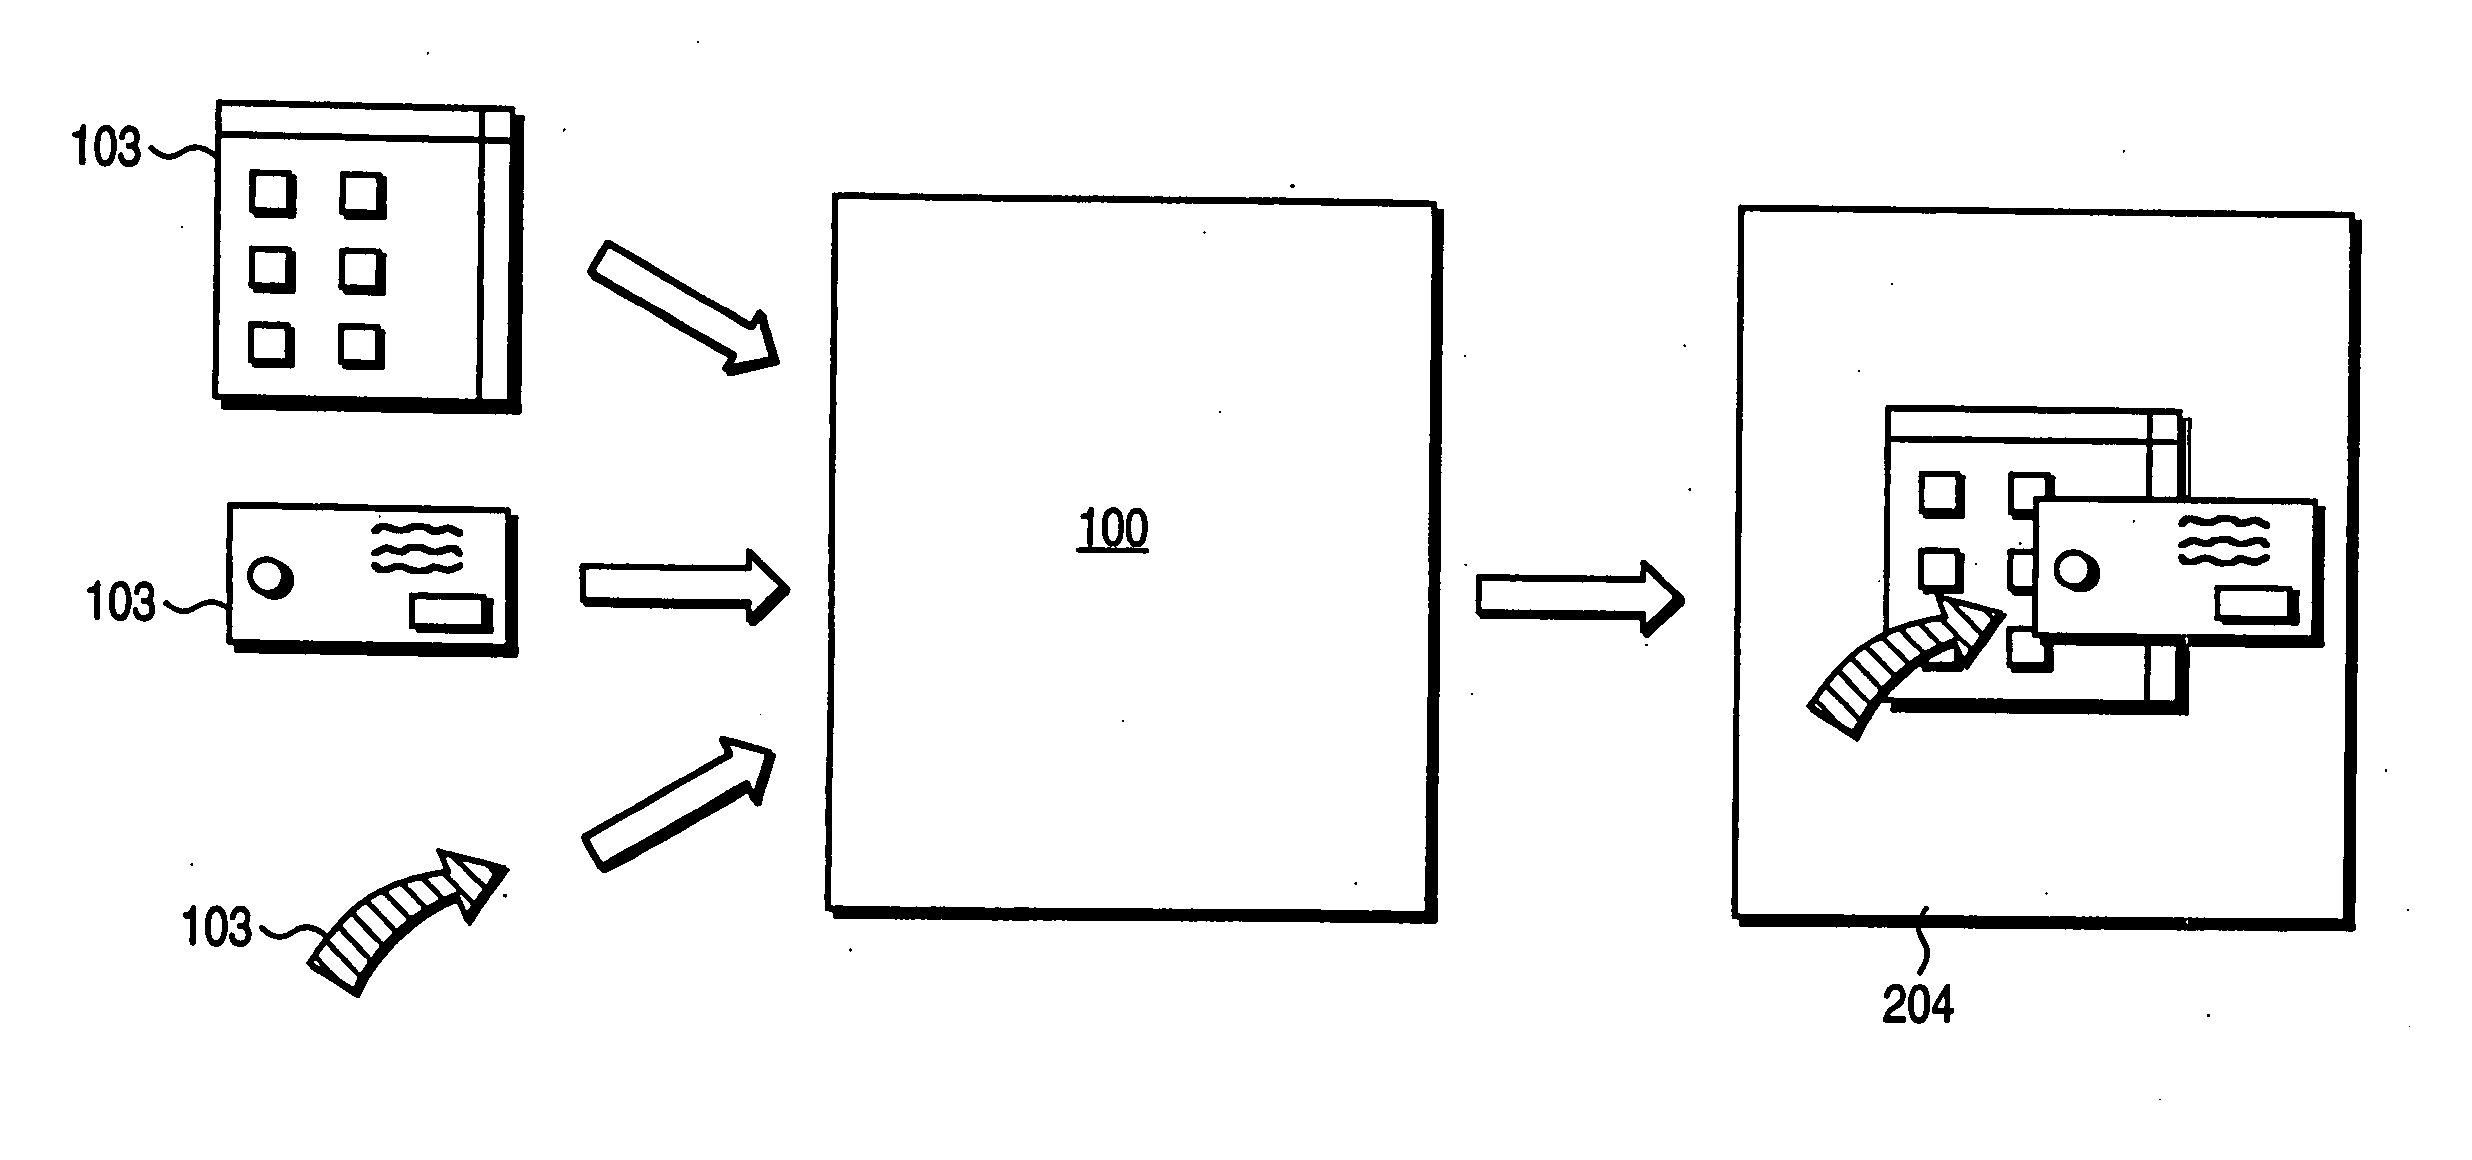 Rendering translucent layers in a display system